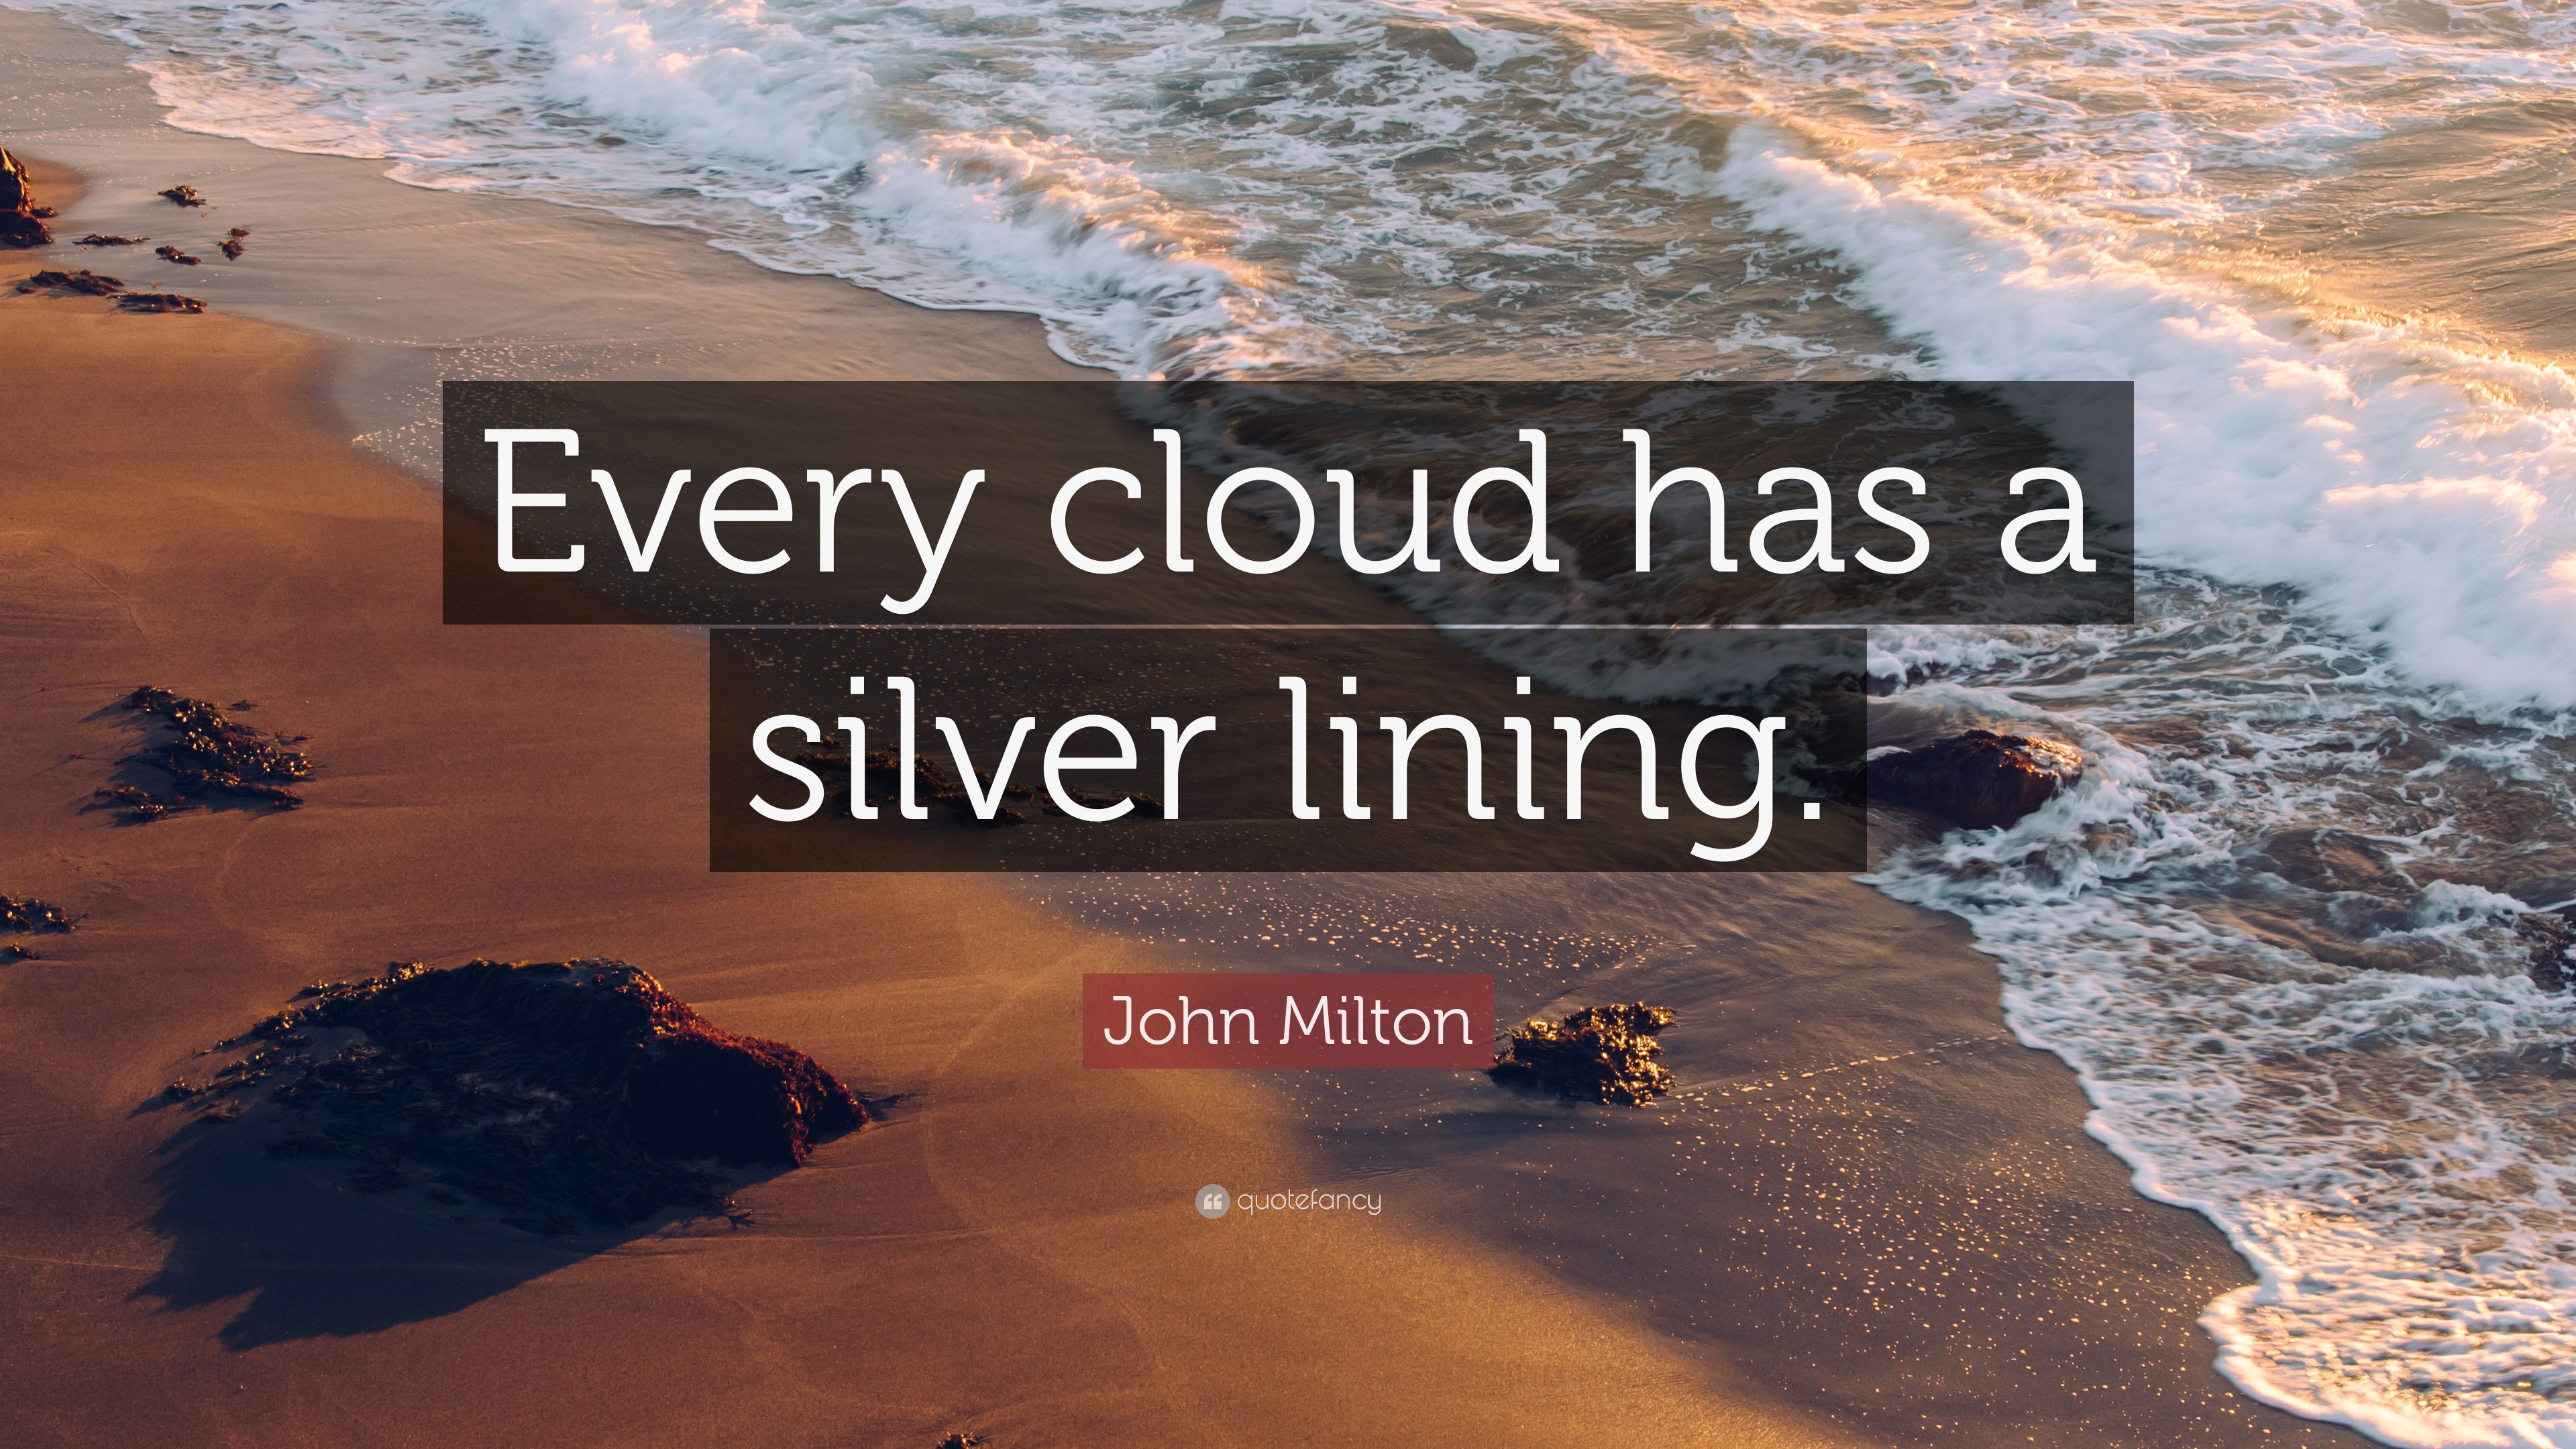 Every Cloud Has a Silver Lining: 10 Inspirational Fundraising Clichés